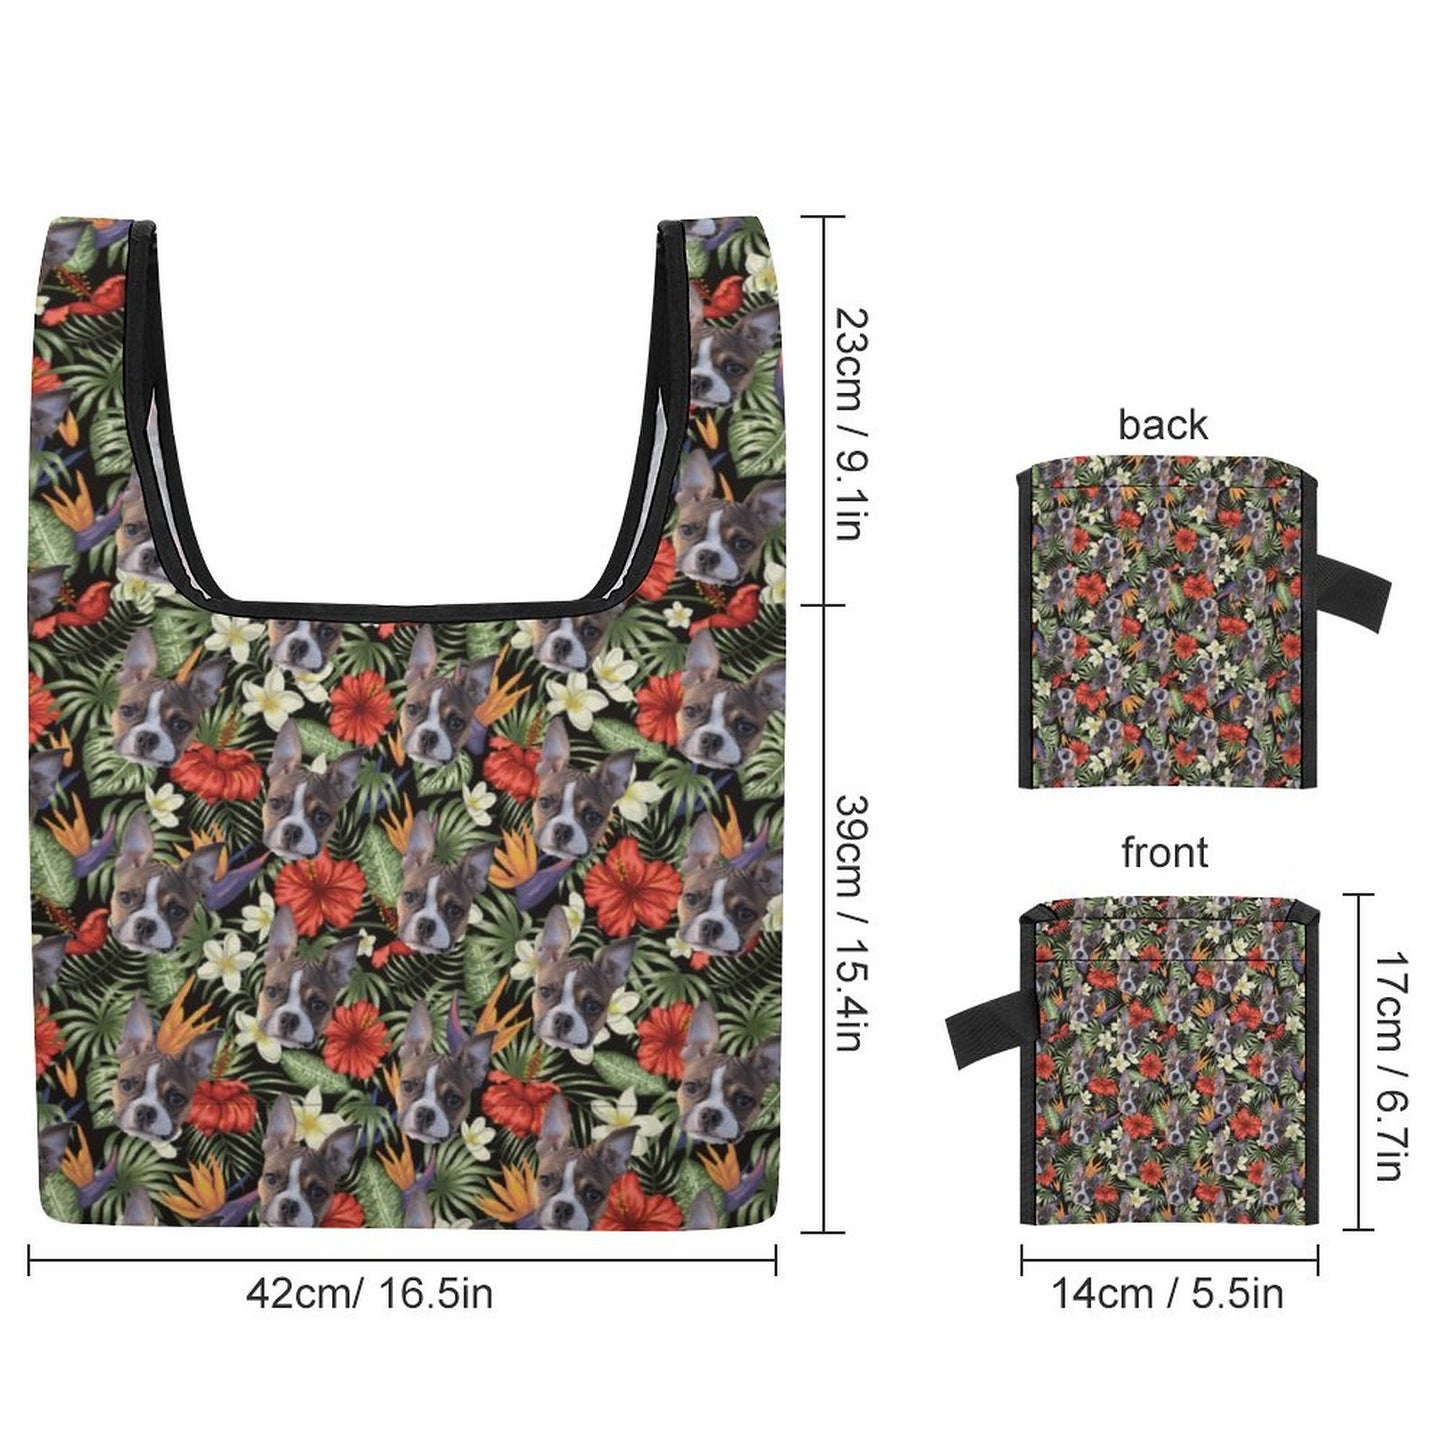 HAWAIIAN STYLE FACE - Reusable and Eco-Friendly Grocery Bags